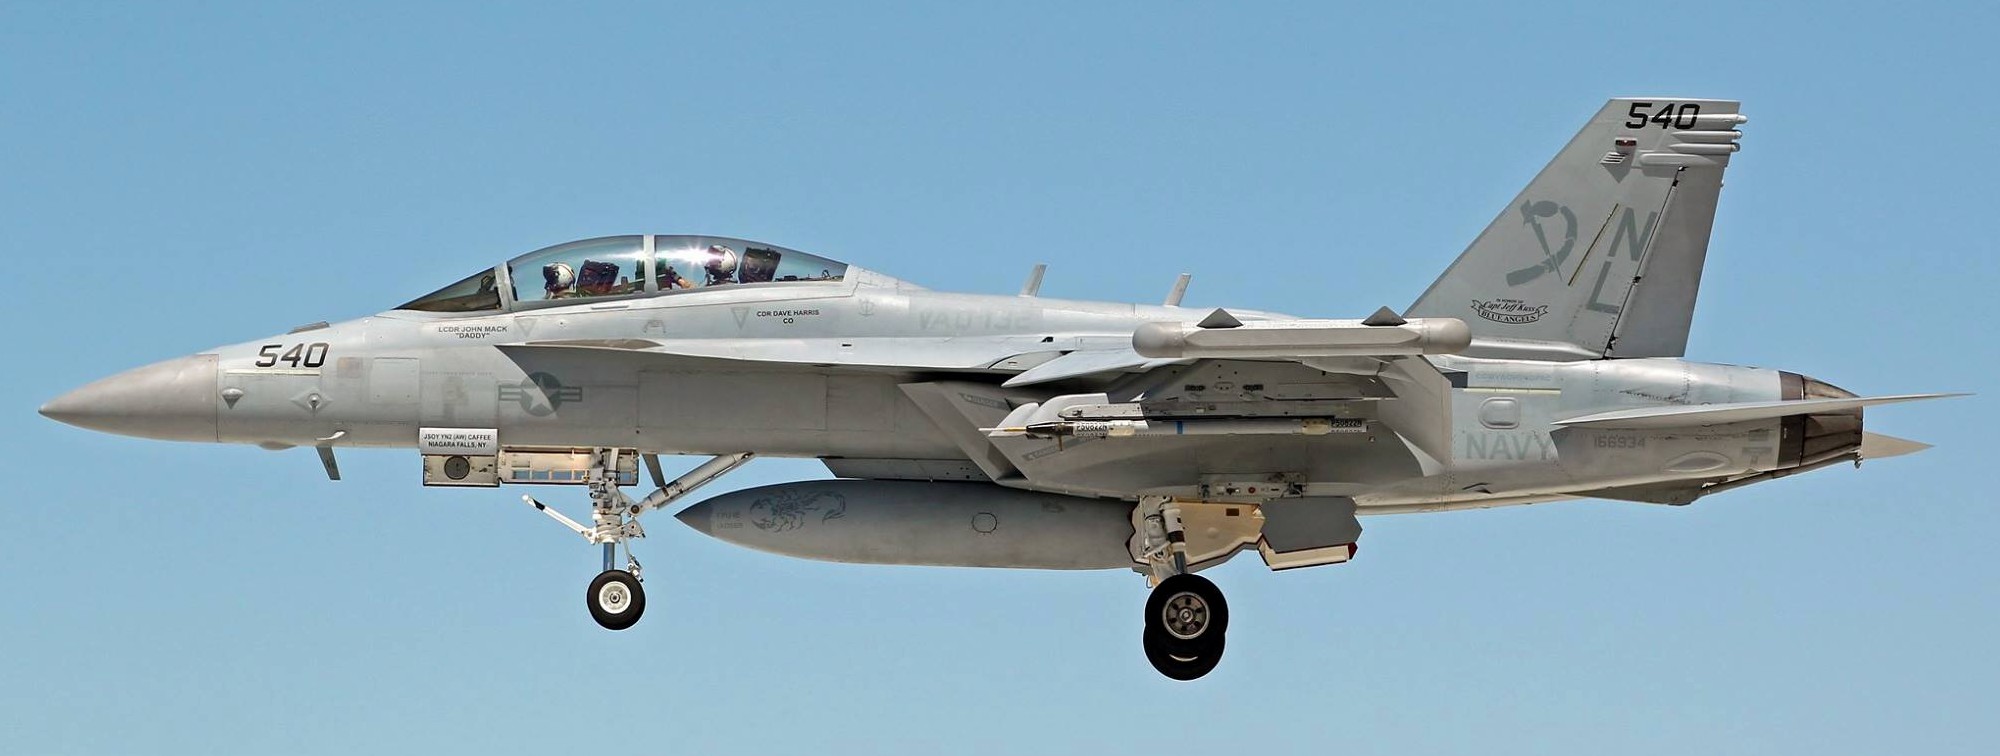 vaq-132 scorpions electronic attack squadron vaqron us navy boeing ea-18g growler nellis afb nevada 20